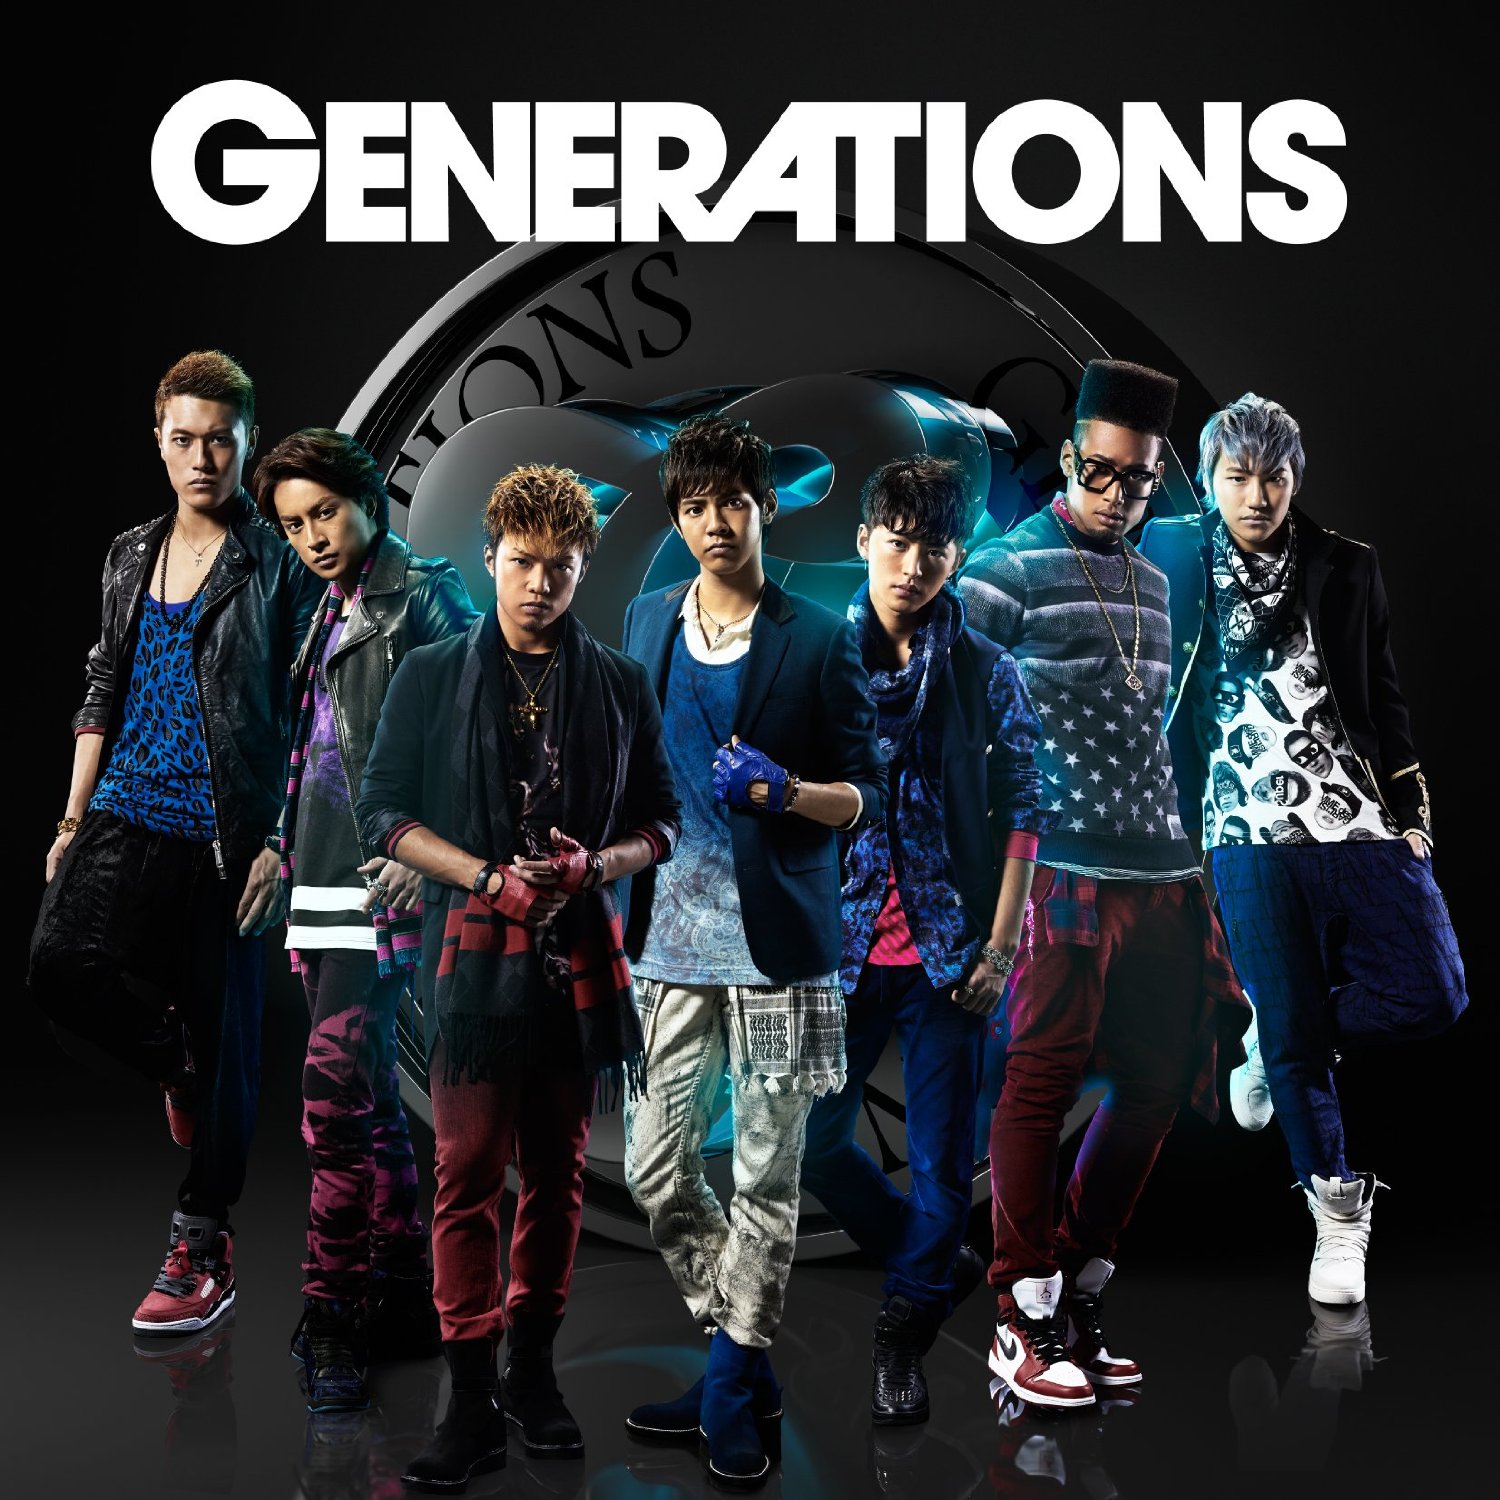 Generations From Exile Tribe ドラマ High Lowがとにかく凄い カッコいい Exile Tribe Naver まとめ